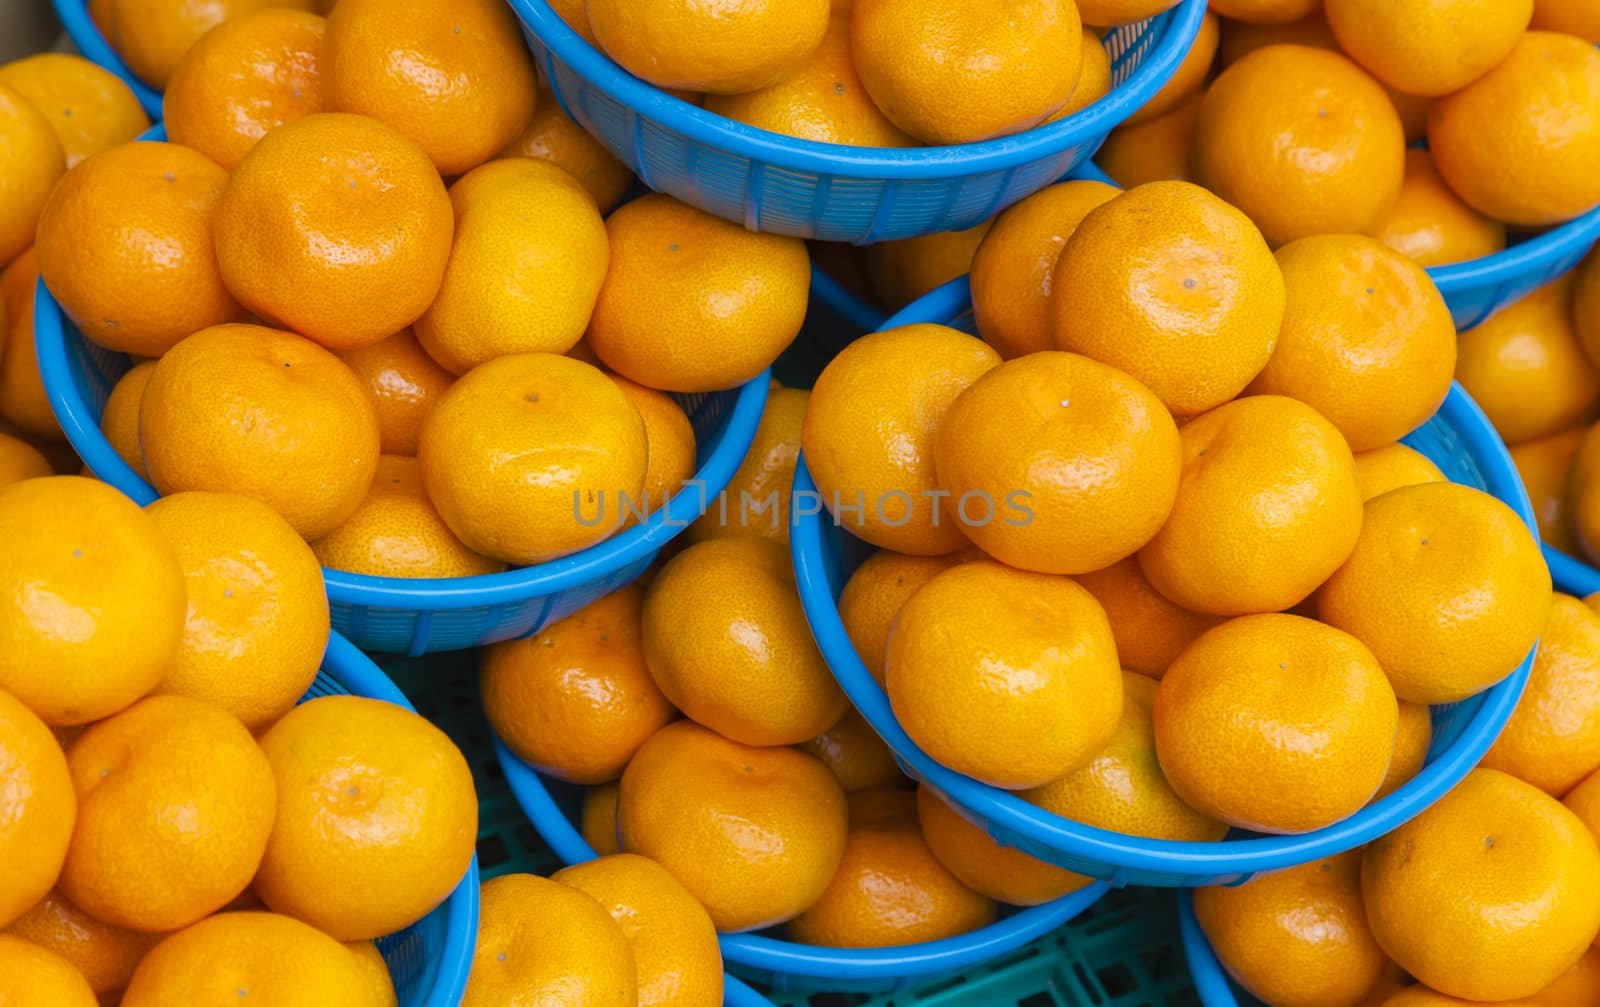 Oranges in baskets for sale in a food market by ymgerman